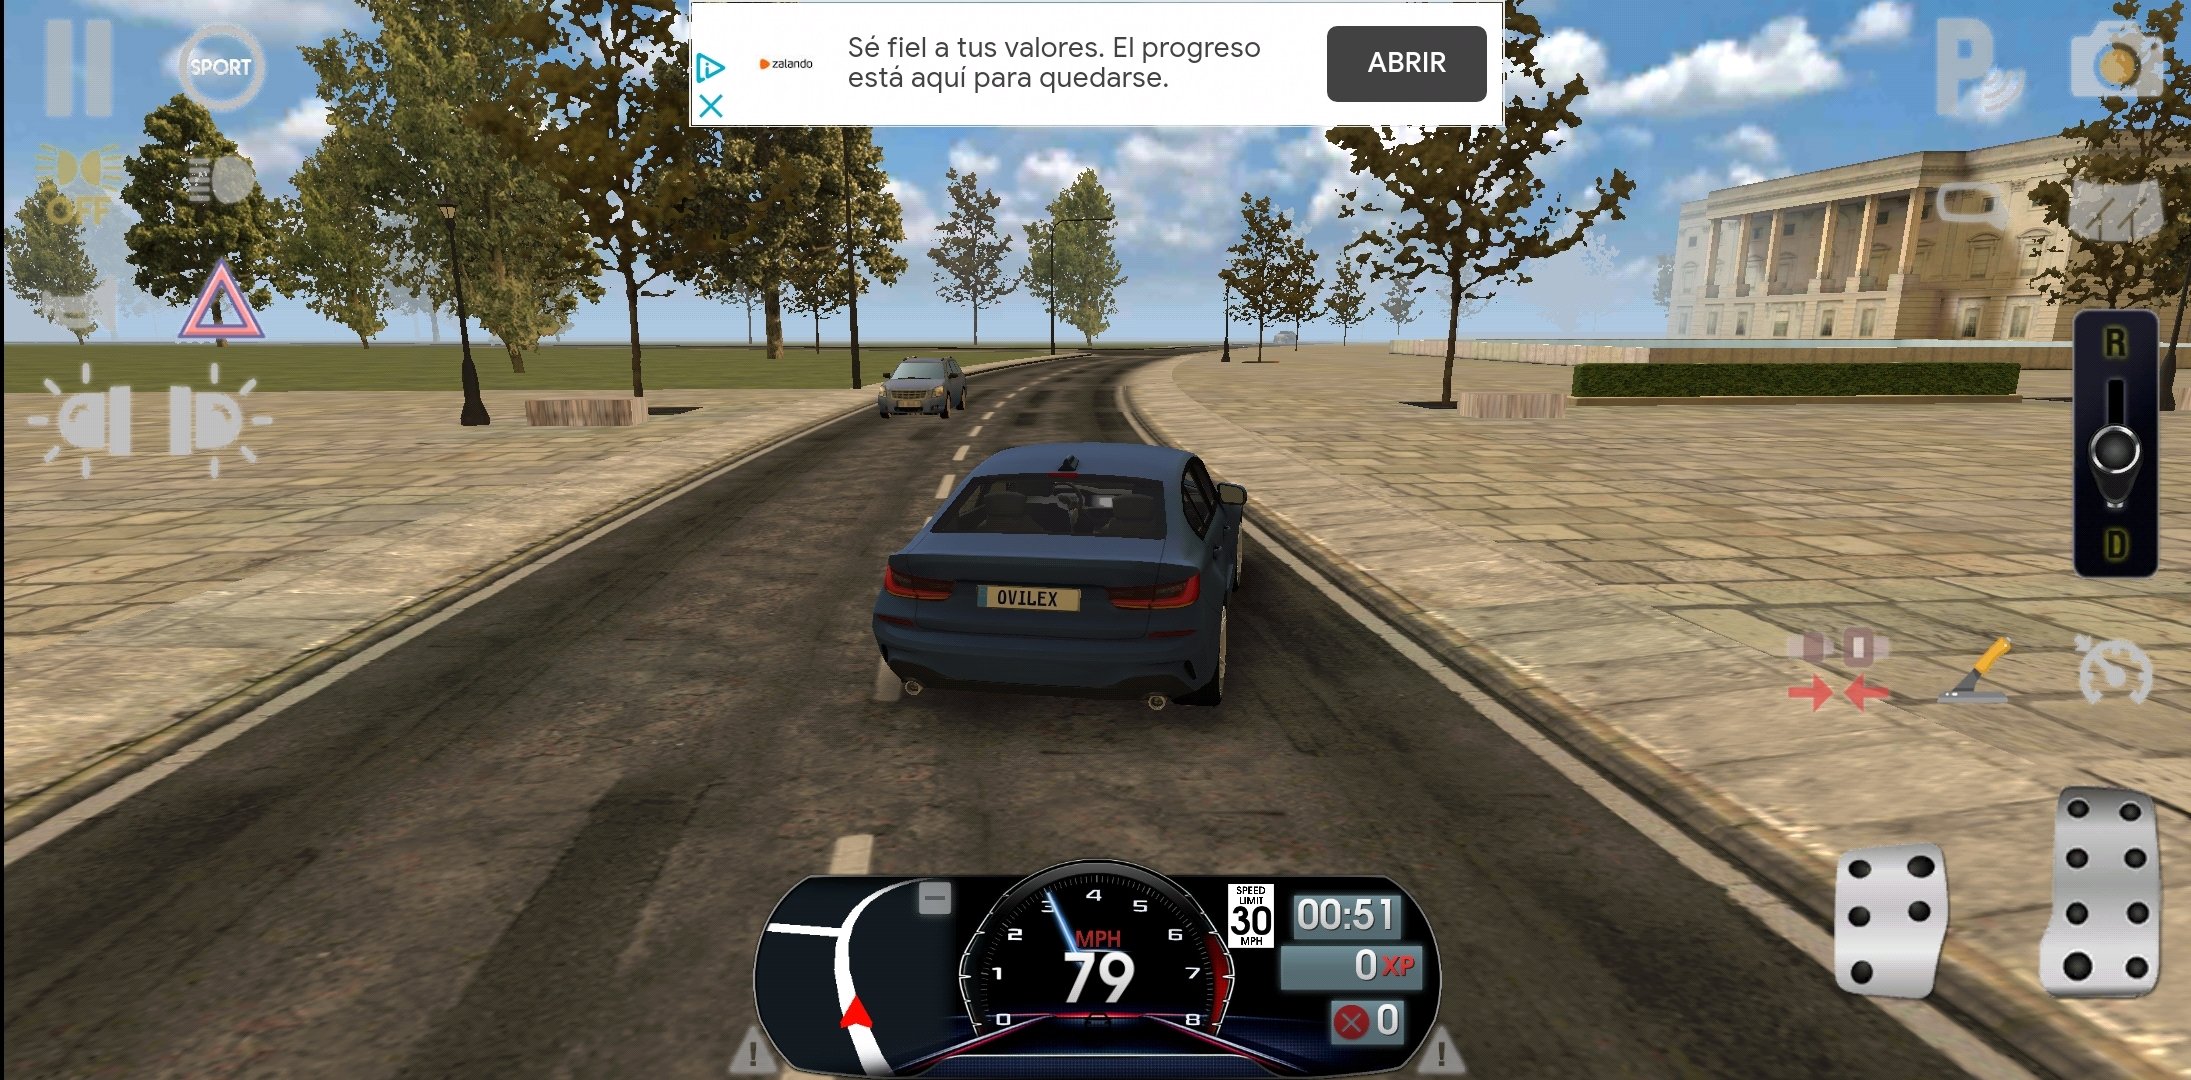 Play Driving School Simulator Online for Free on PC & Mobile